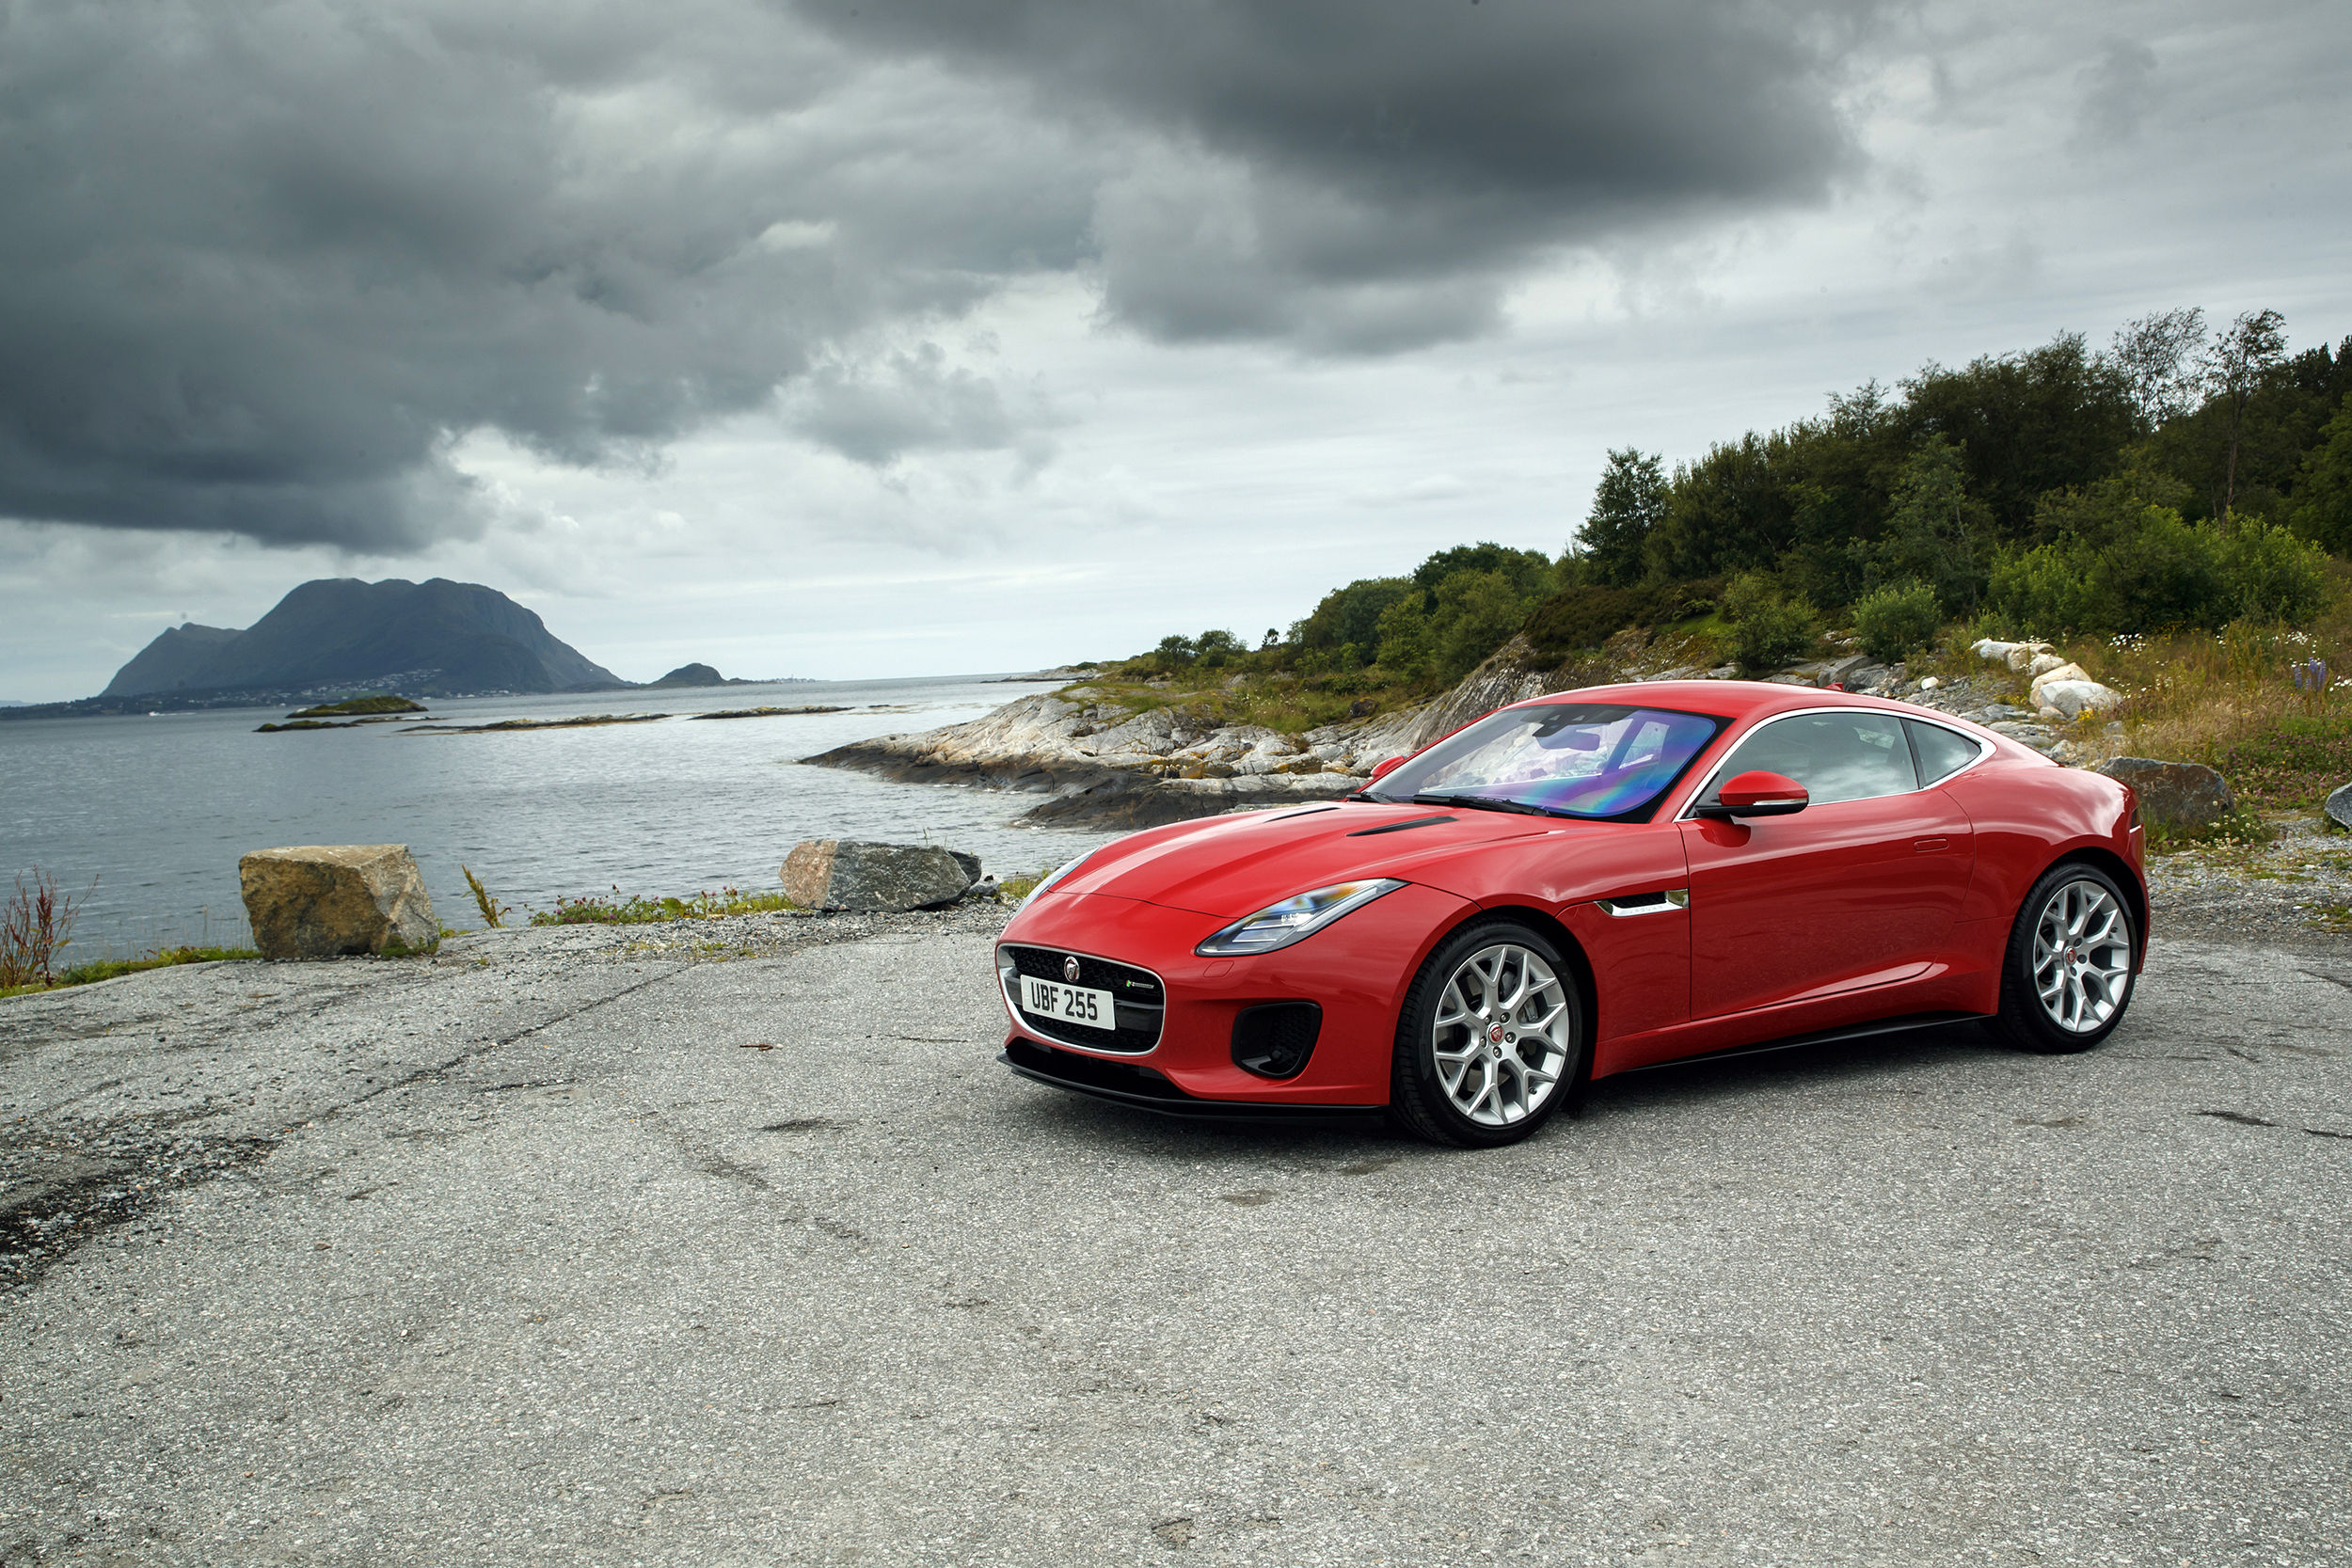 6 reasons why the Jaguar F-Type 2.0 is the next everyday sports car